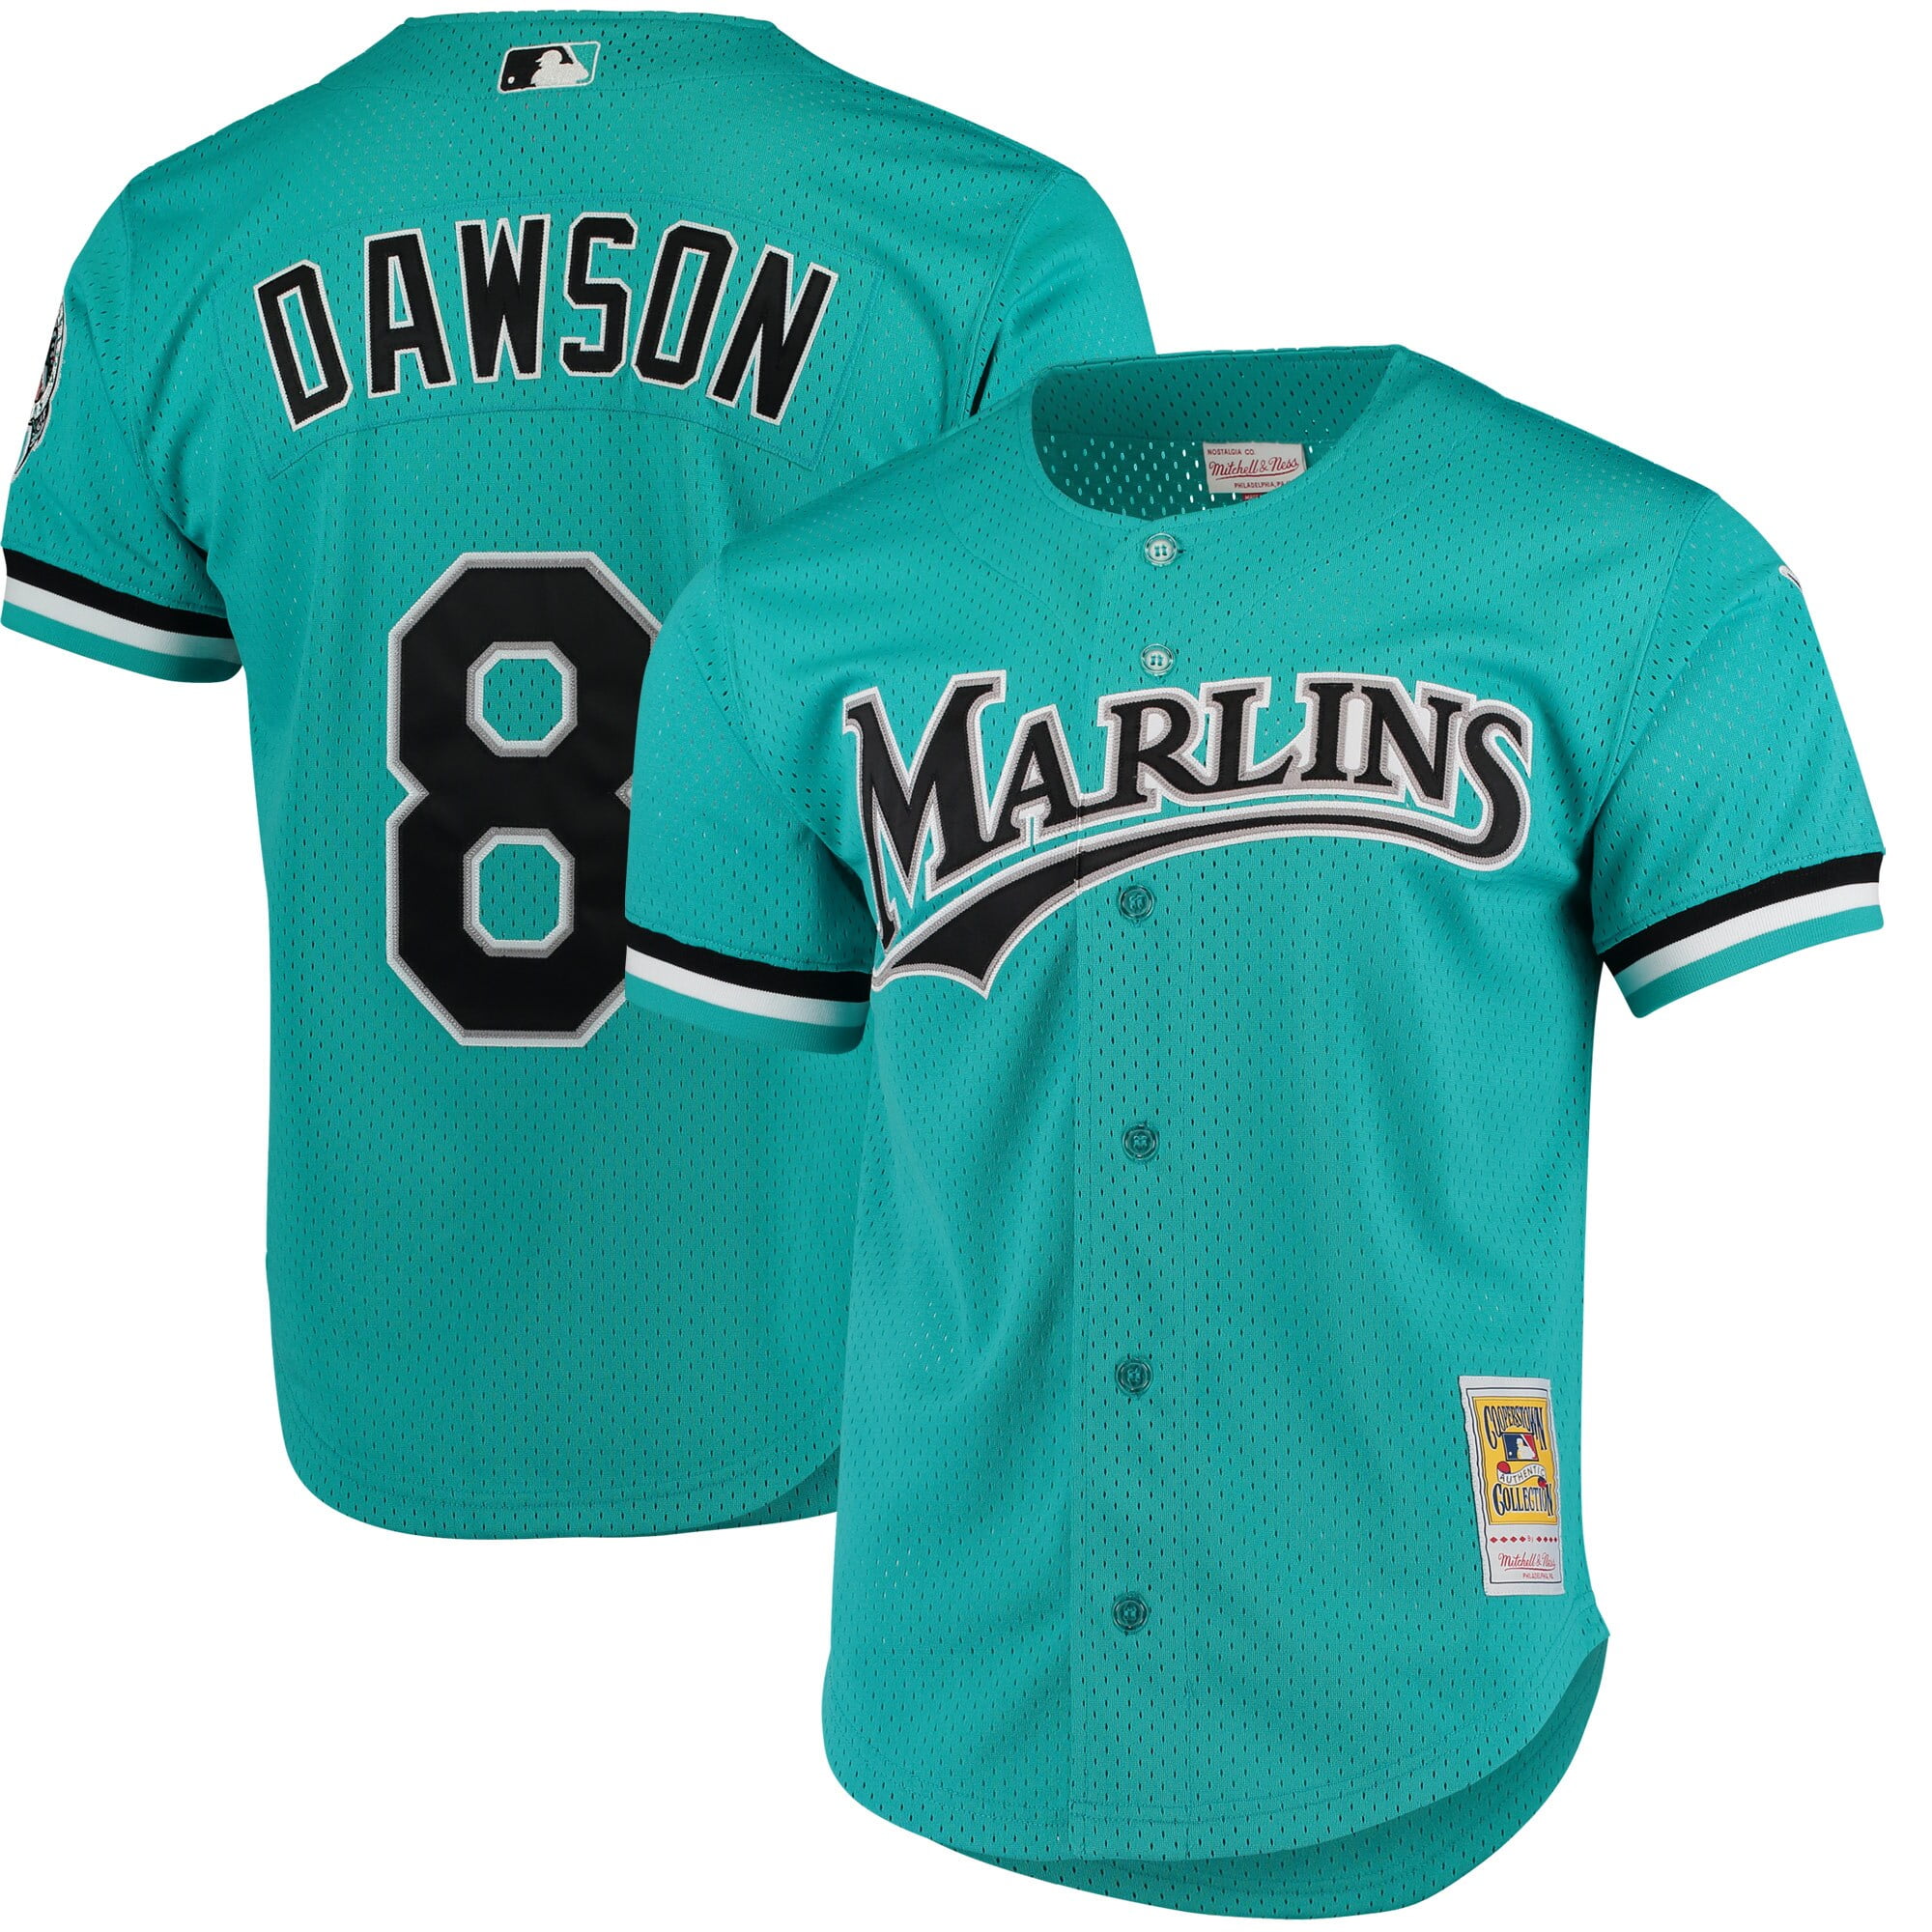 marlins old jersey